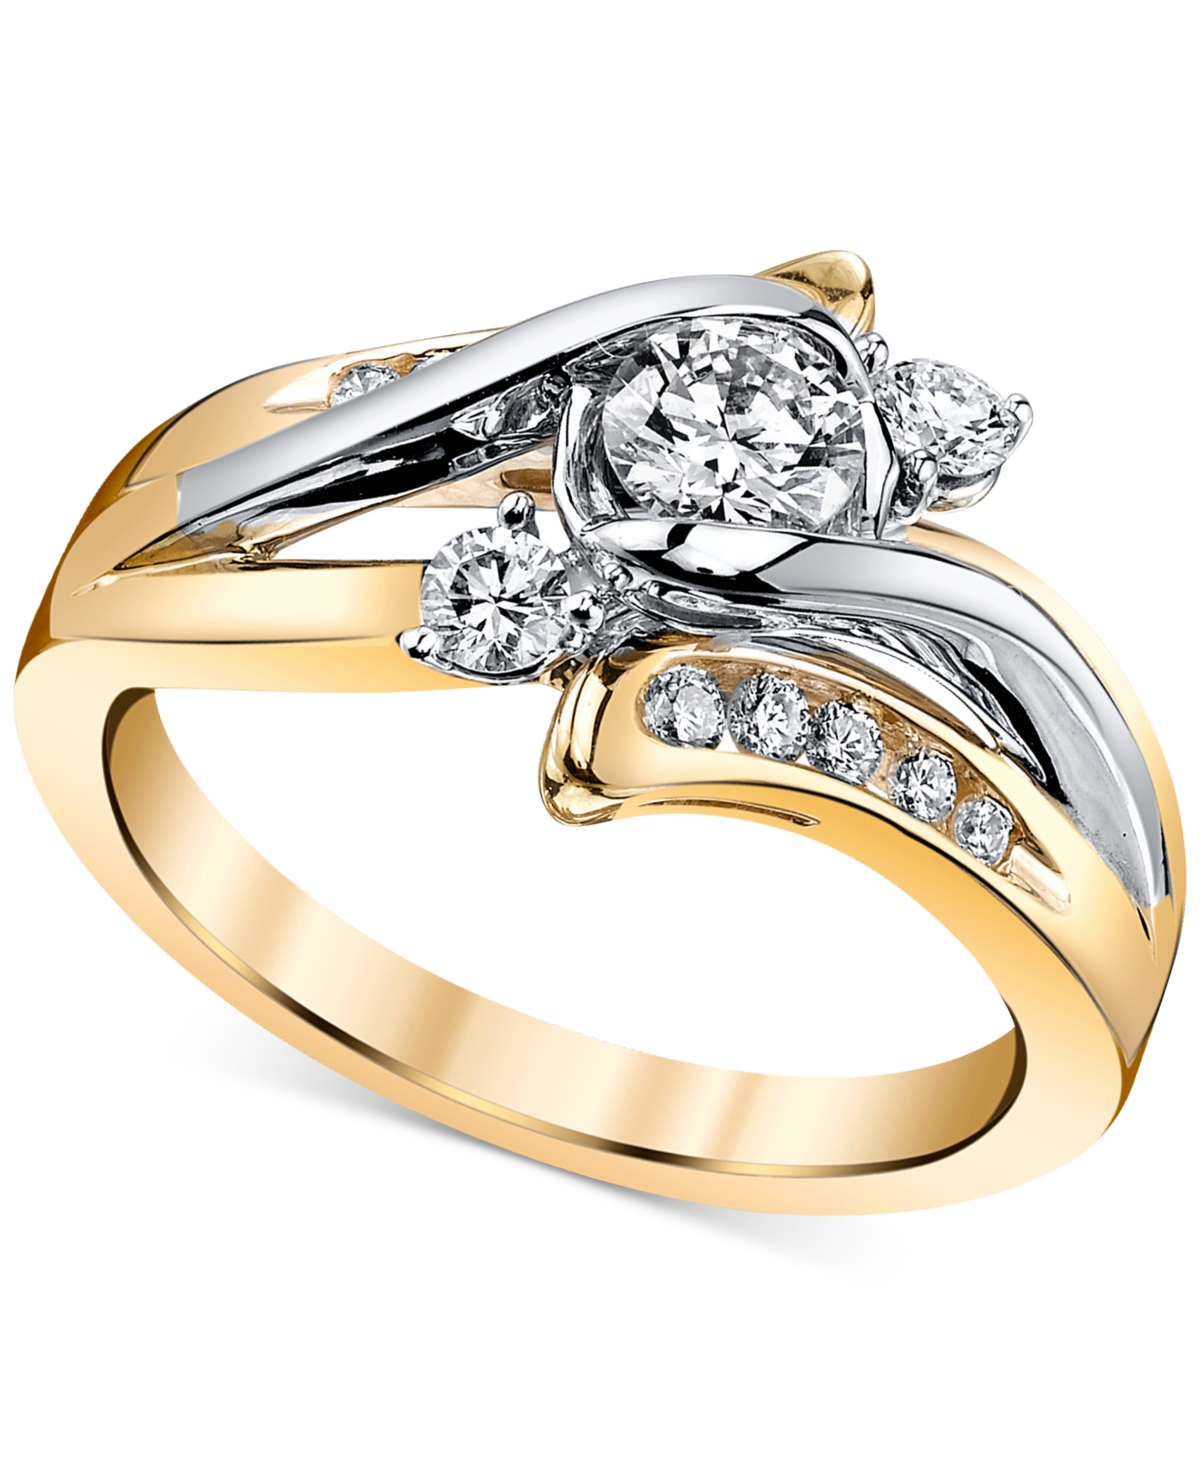 Diamond Engagement Ring (5/8 ct. t.w.) in 14k Gold and White Gold - Yellow Gold